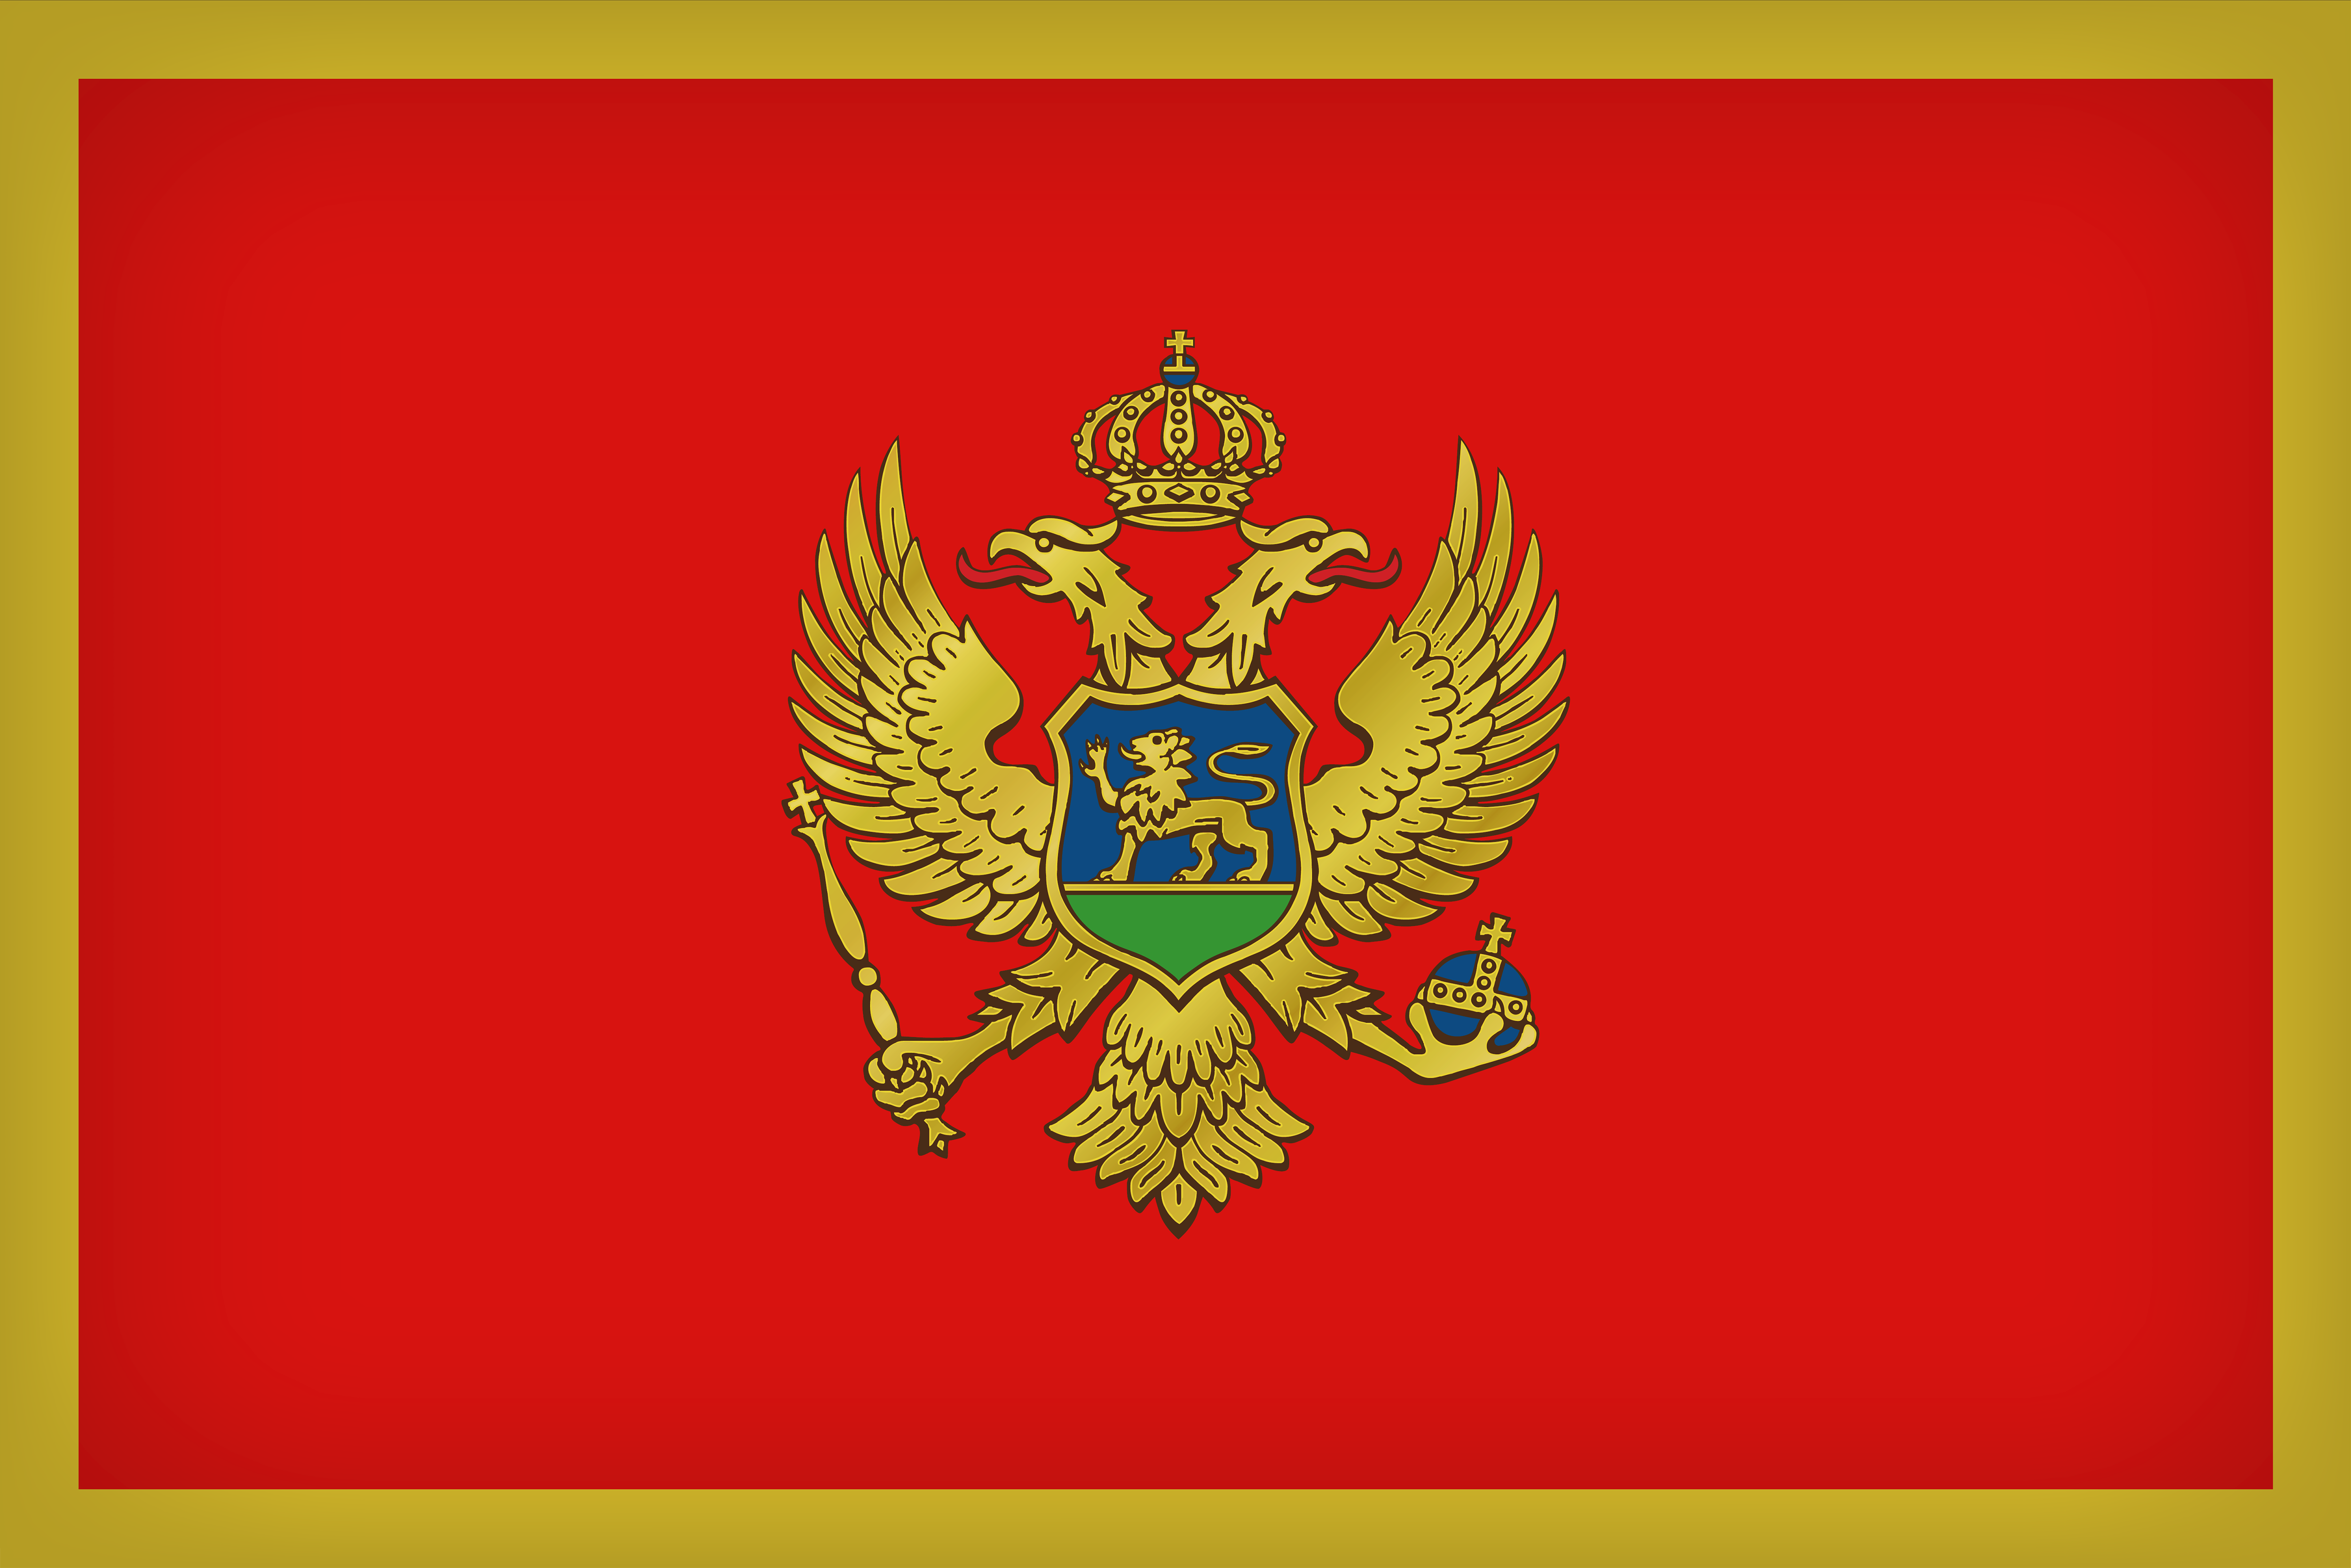 Montenegro Large Flag Gallery Yopriceville High Quality Free Images 